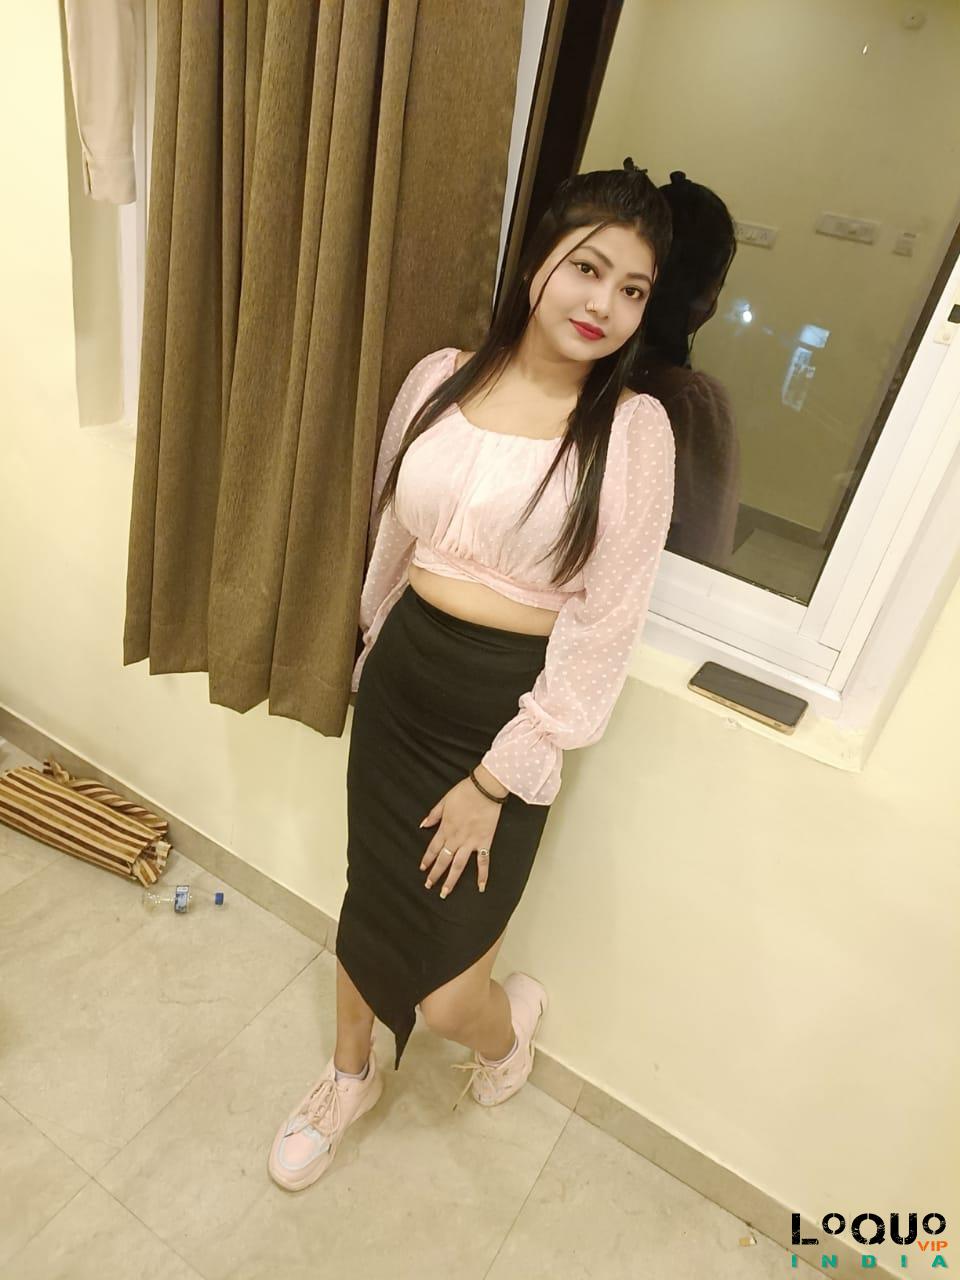 Call Girls Karnataka: Betul Call Gril 80022//12248 Only For Sex And High Profile Best Gril Sex Availab